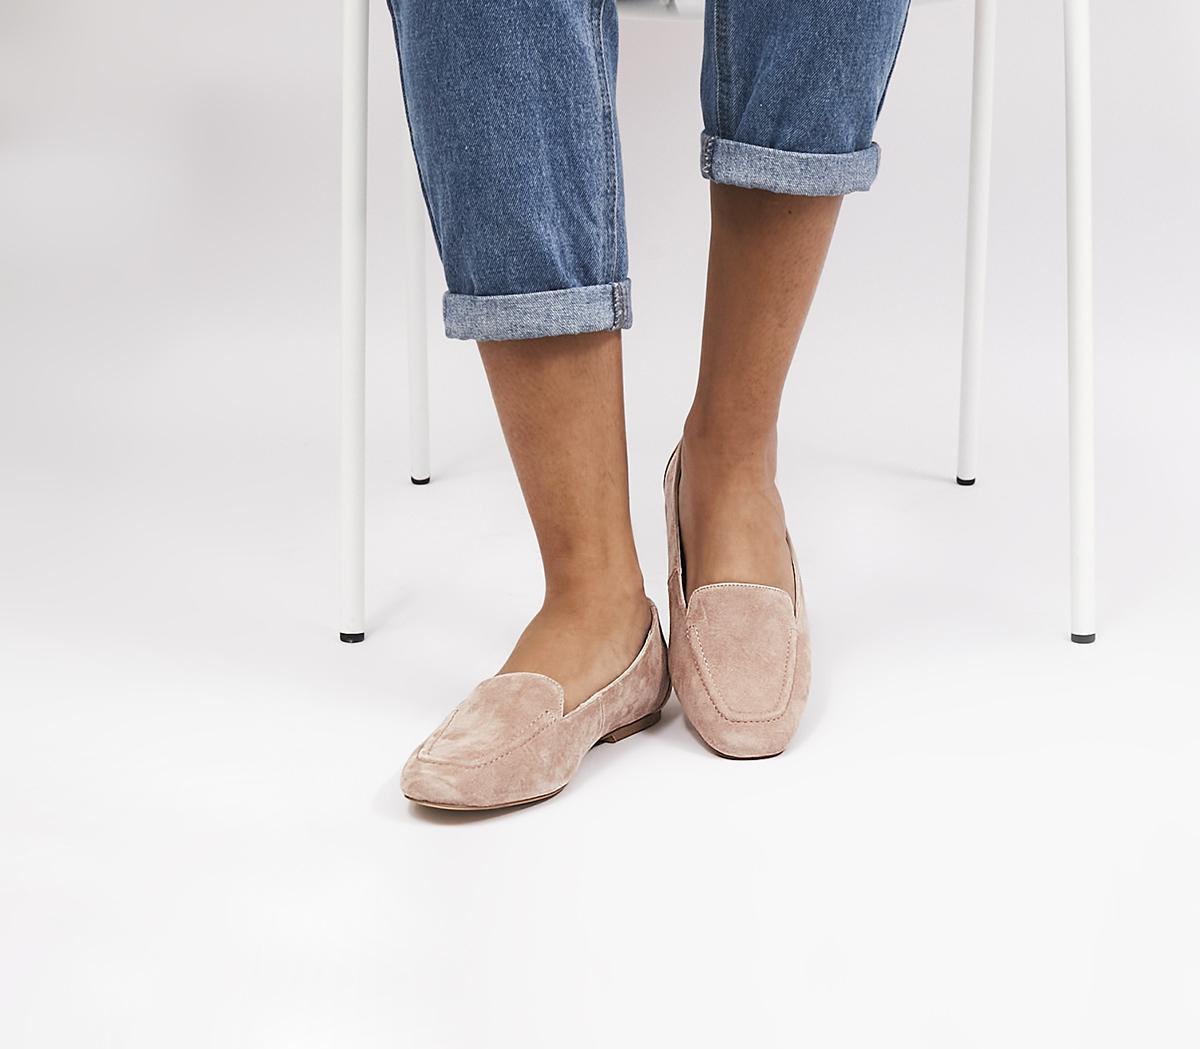 OFFICEWide Fit Flying Suede LoafersBlush Suede